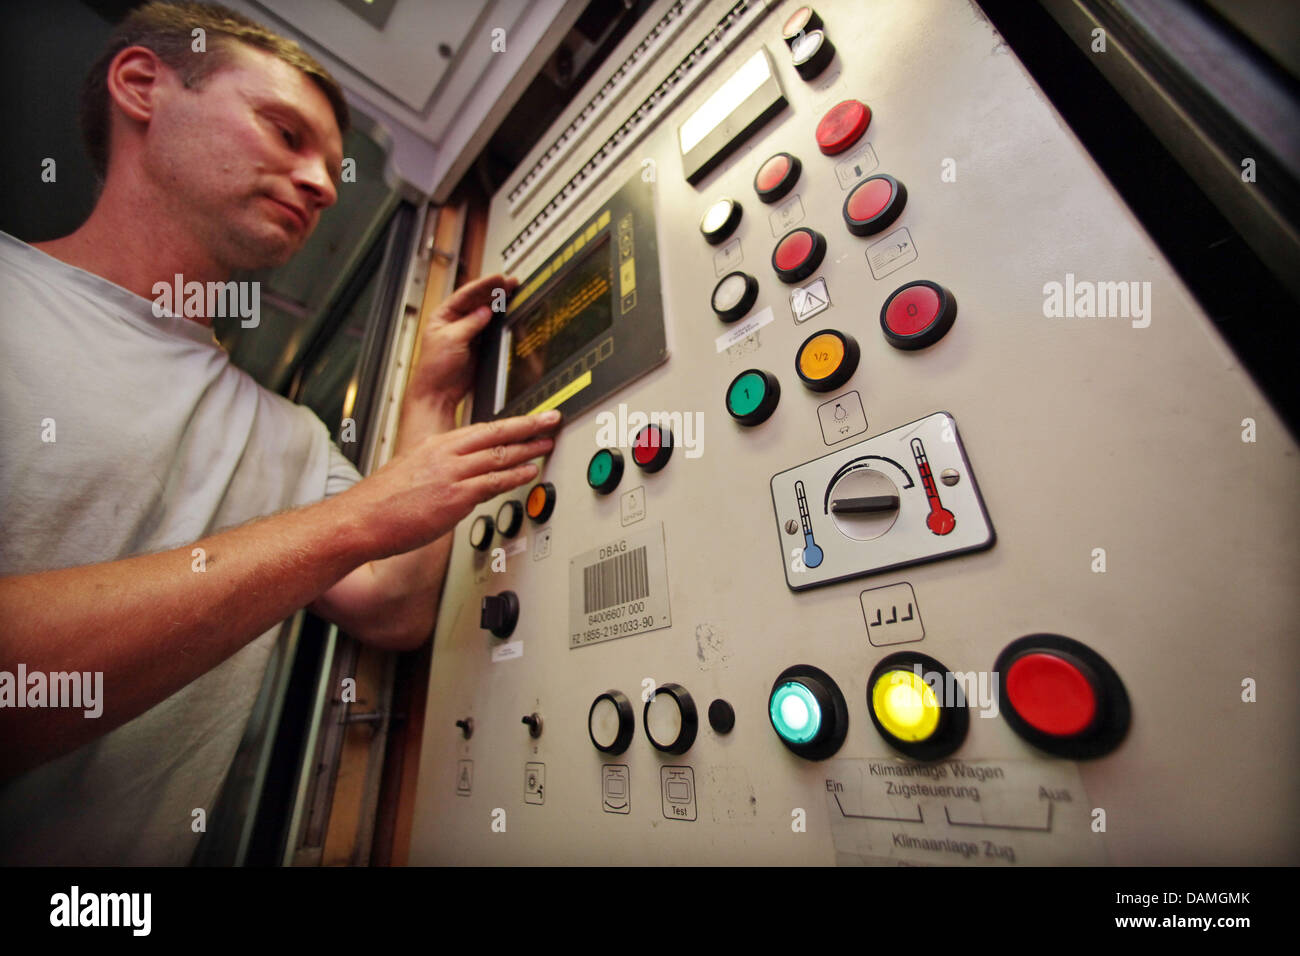 Technician Sven Beschorner works on an air condition inside a Deutsche Bahn InterCity (IC) train at the ICE plant in Leipzig, Germany, 14 June 2011. Among other technical equipment, the thermostats are regularly checked. Especially those inside ICE trains were often overloaded last summer. Photo: Jan Woitas Stock Photo